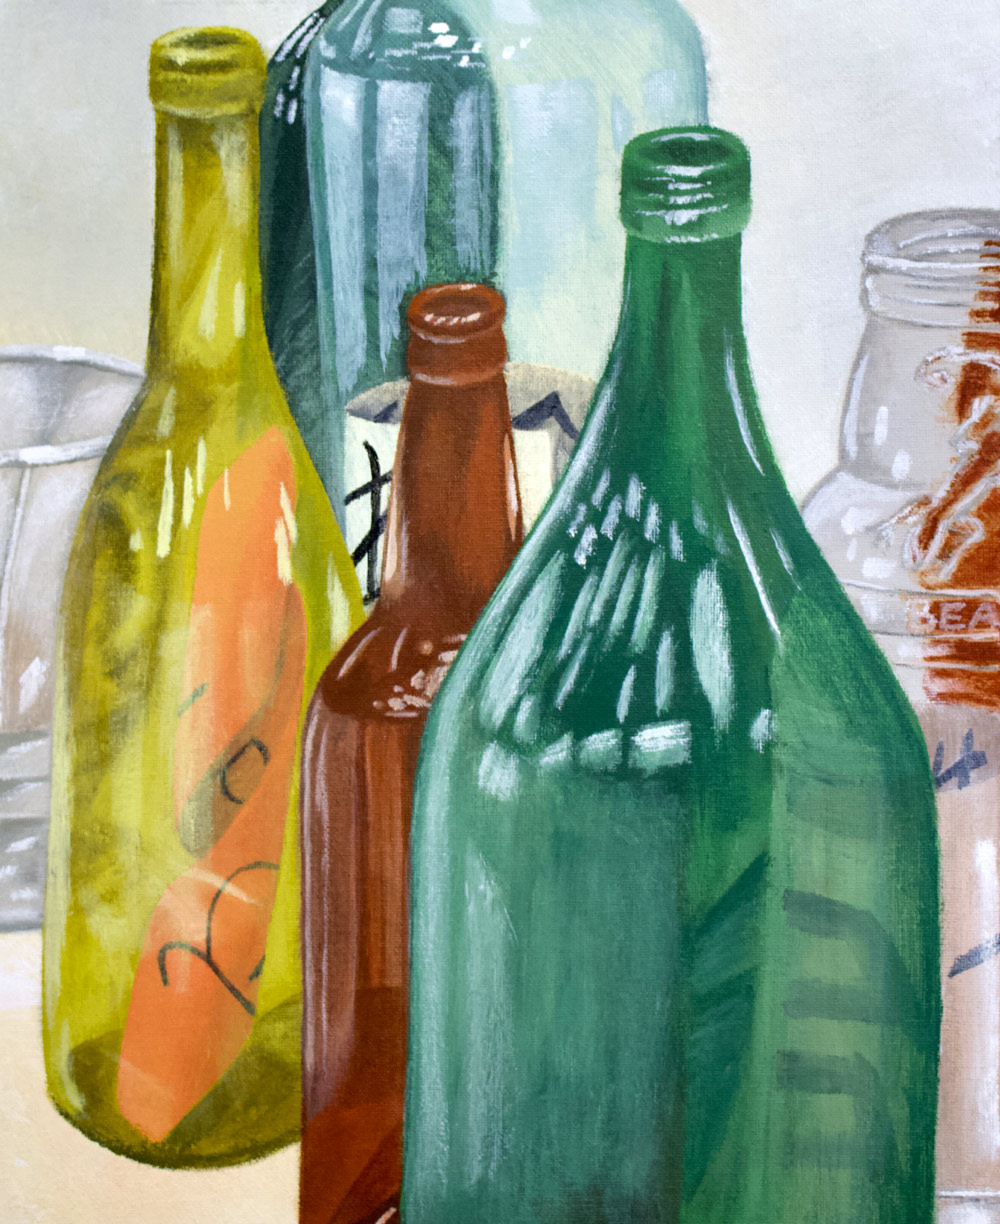 Painting of glass bottles.